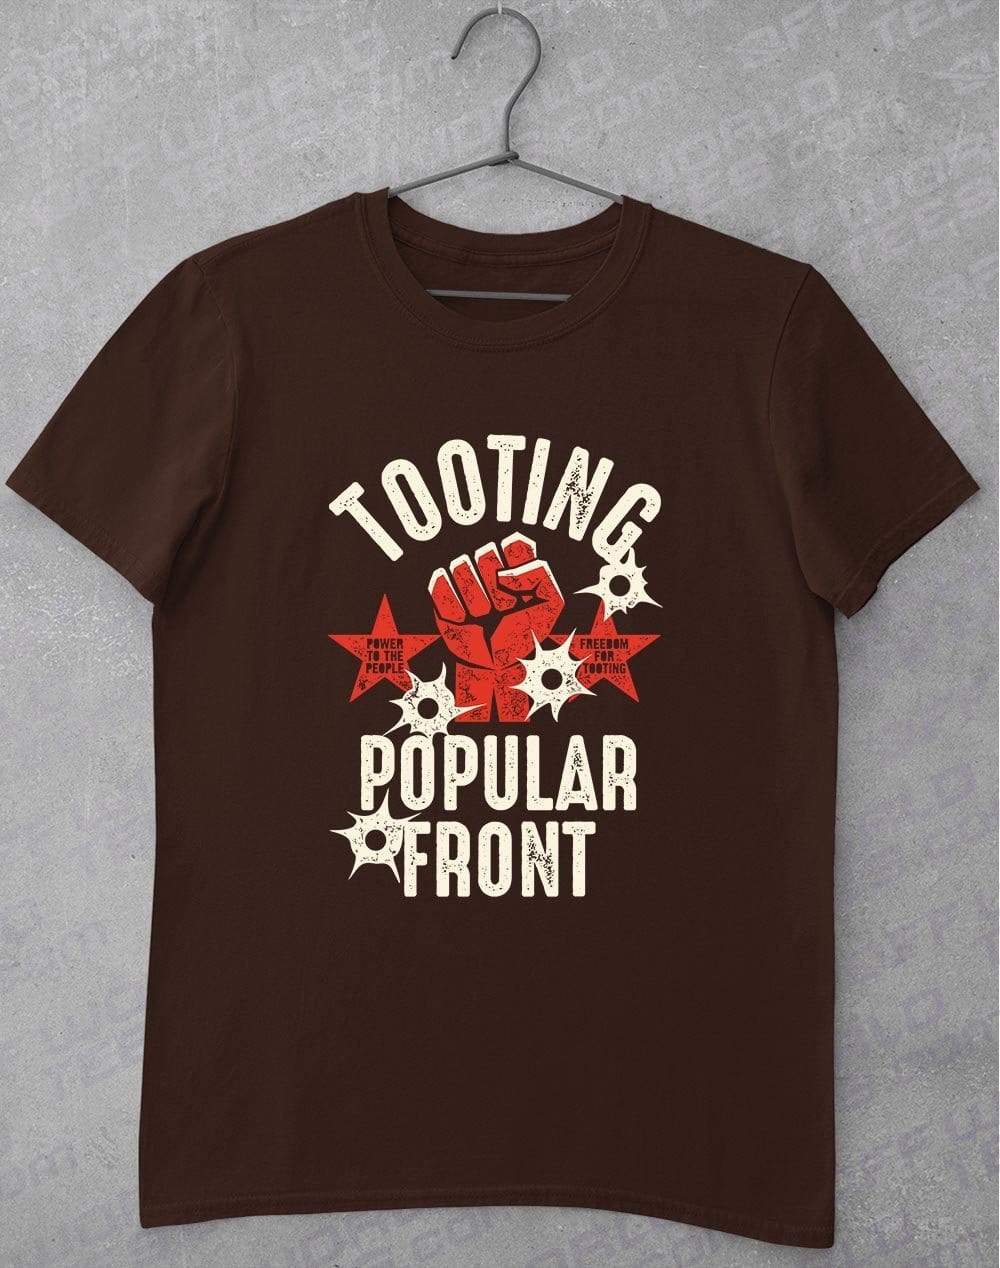 Tooting Popular Front T-Shirt S / Dark Chocolate  - Off World Tees